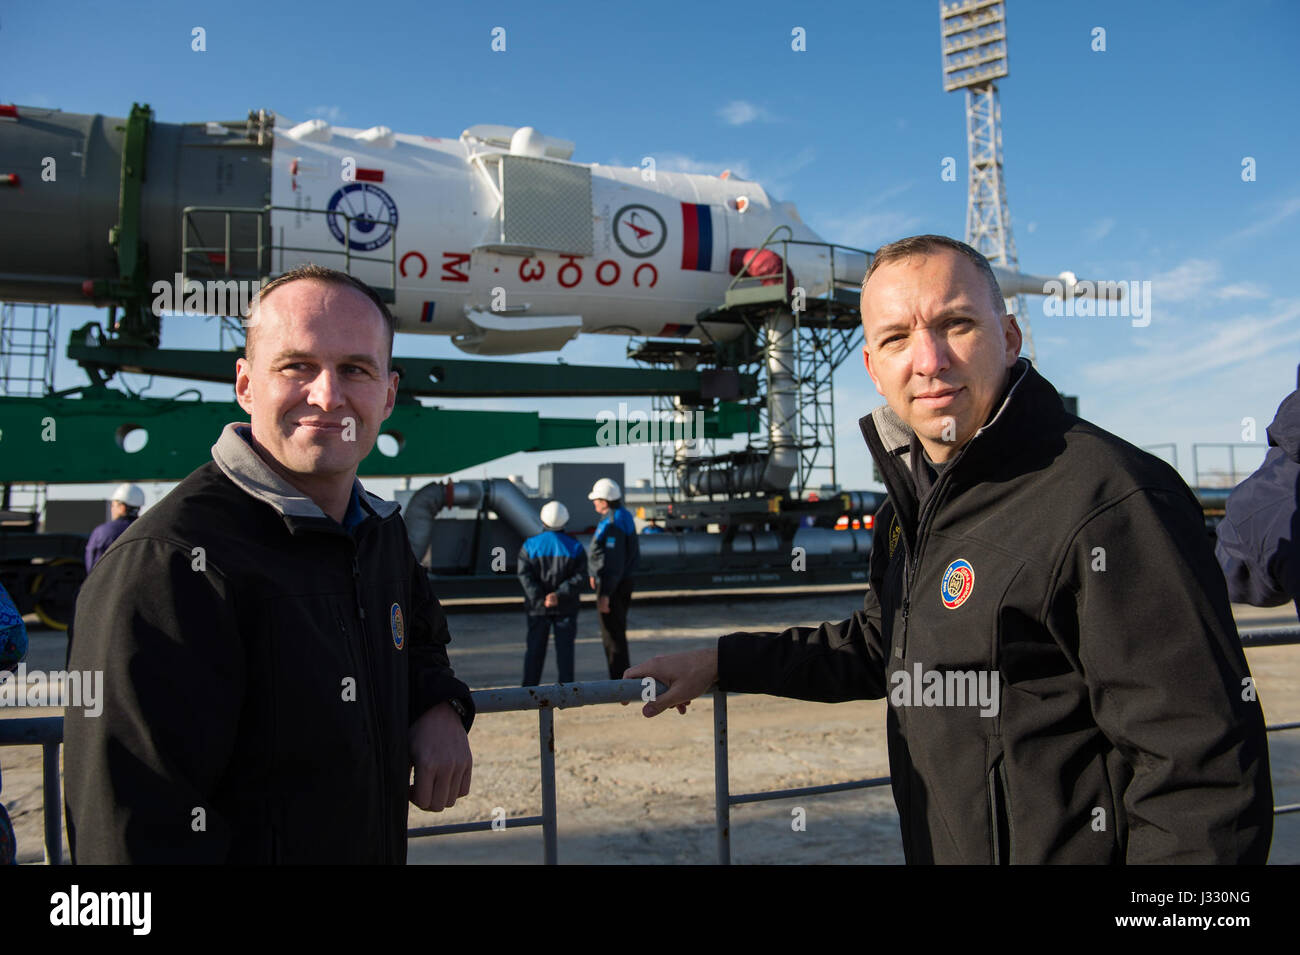 The Expedition 51 backup crew, Soyuz Commander Sergey Ryazanskiy of Roscosmos, left, and Flight Engineer Randy Bresnik of NASA, right, are photographed in front of the Soyuz MS-04 spacecraft as it arrives at the launch pad by train on Monday, April 17, 2017 at the Baikonur Cosmodrome in Kazakhstan.  Launch of the Soyuz rocket is scheduled for April 20 Baikonur time and will send Expedition 51 prime crew, Soyuz Commander Fyodor Yurchikhin of Roscosmos and Flight Engineer Jack Fischer of NASA on a four and a half month mission aboard the International Space Station. Photo Credit: (NASA/Aubrey Ge Stock Photo